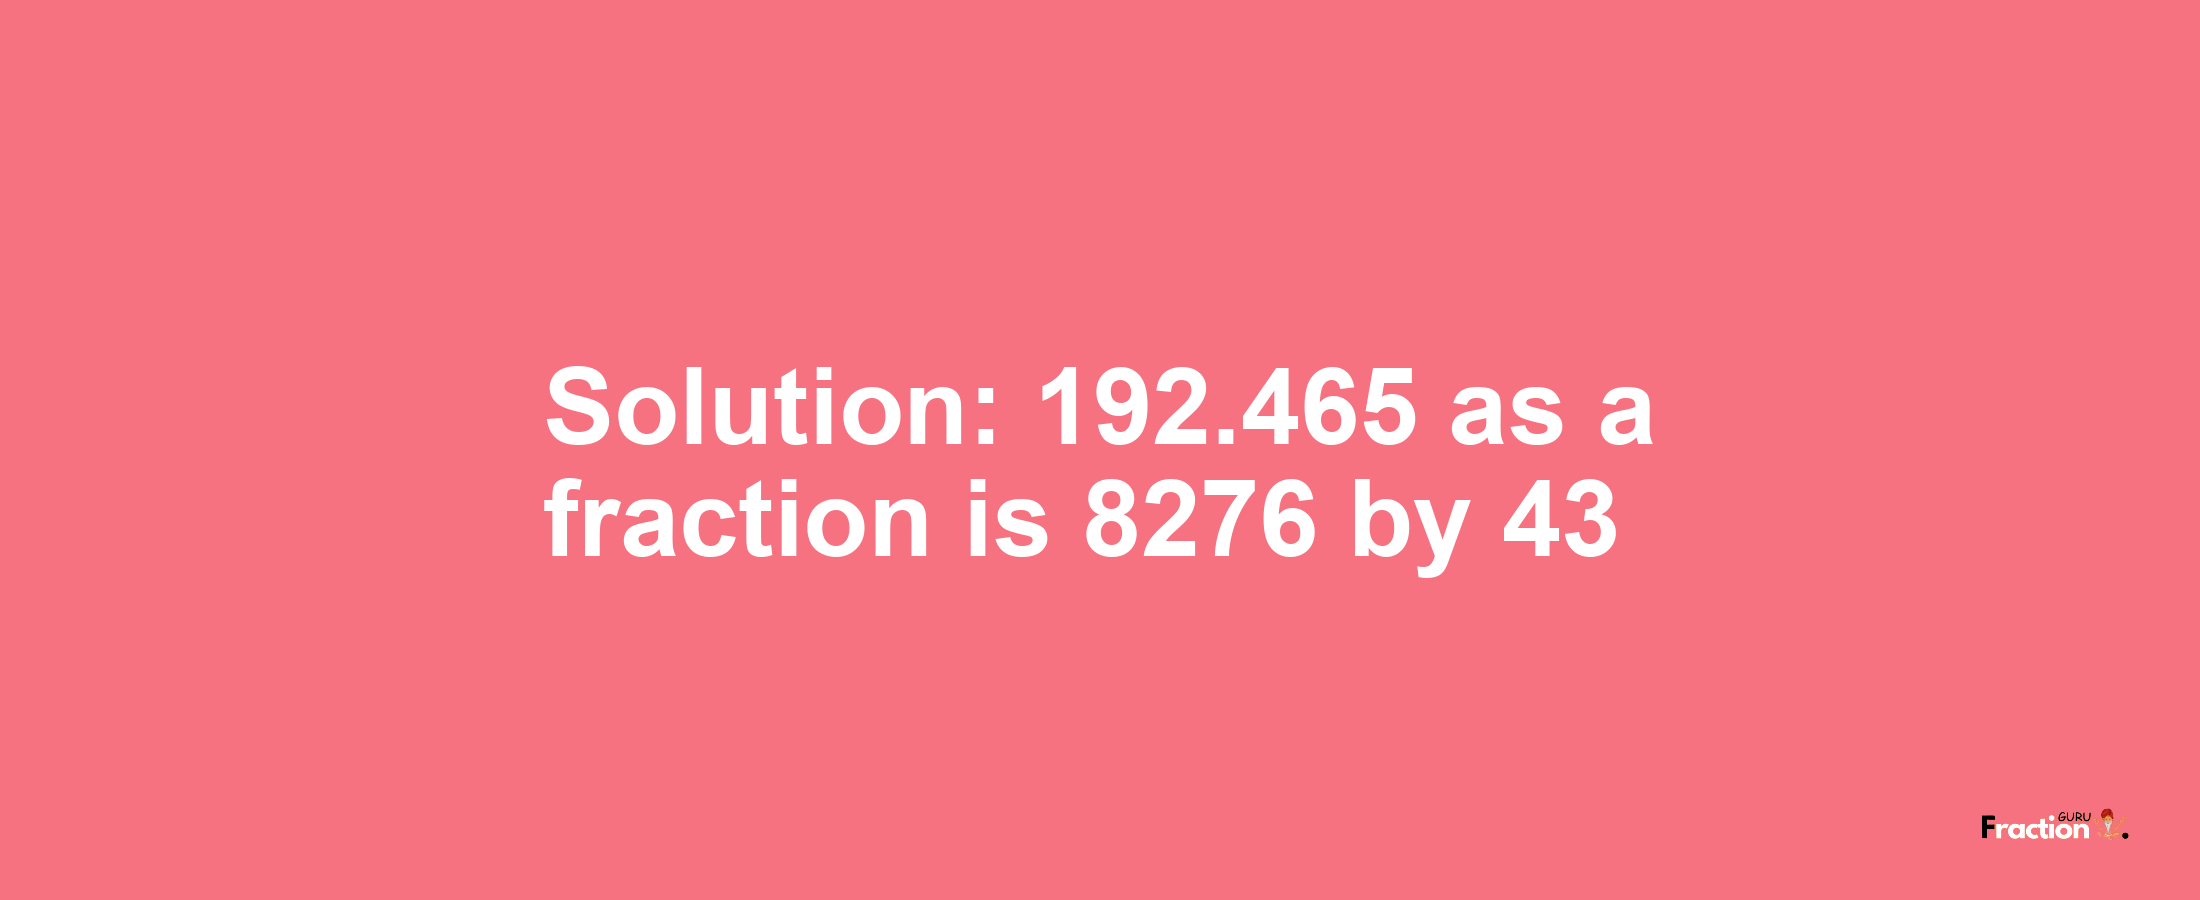 Solution:192.465 as a fraction is 8276/43